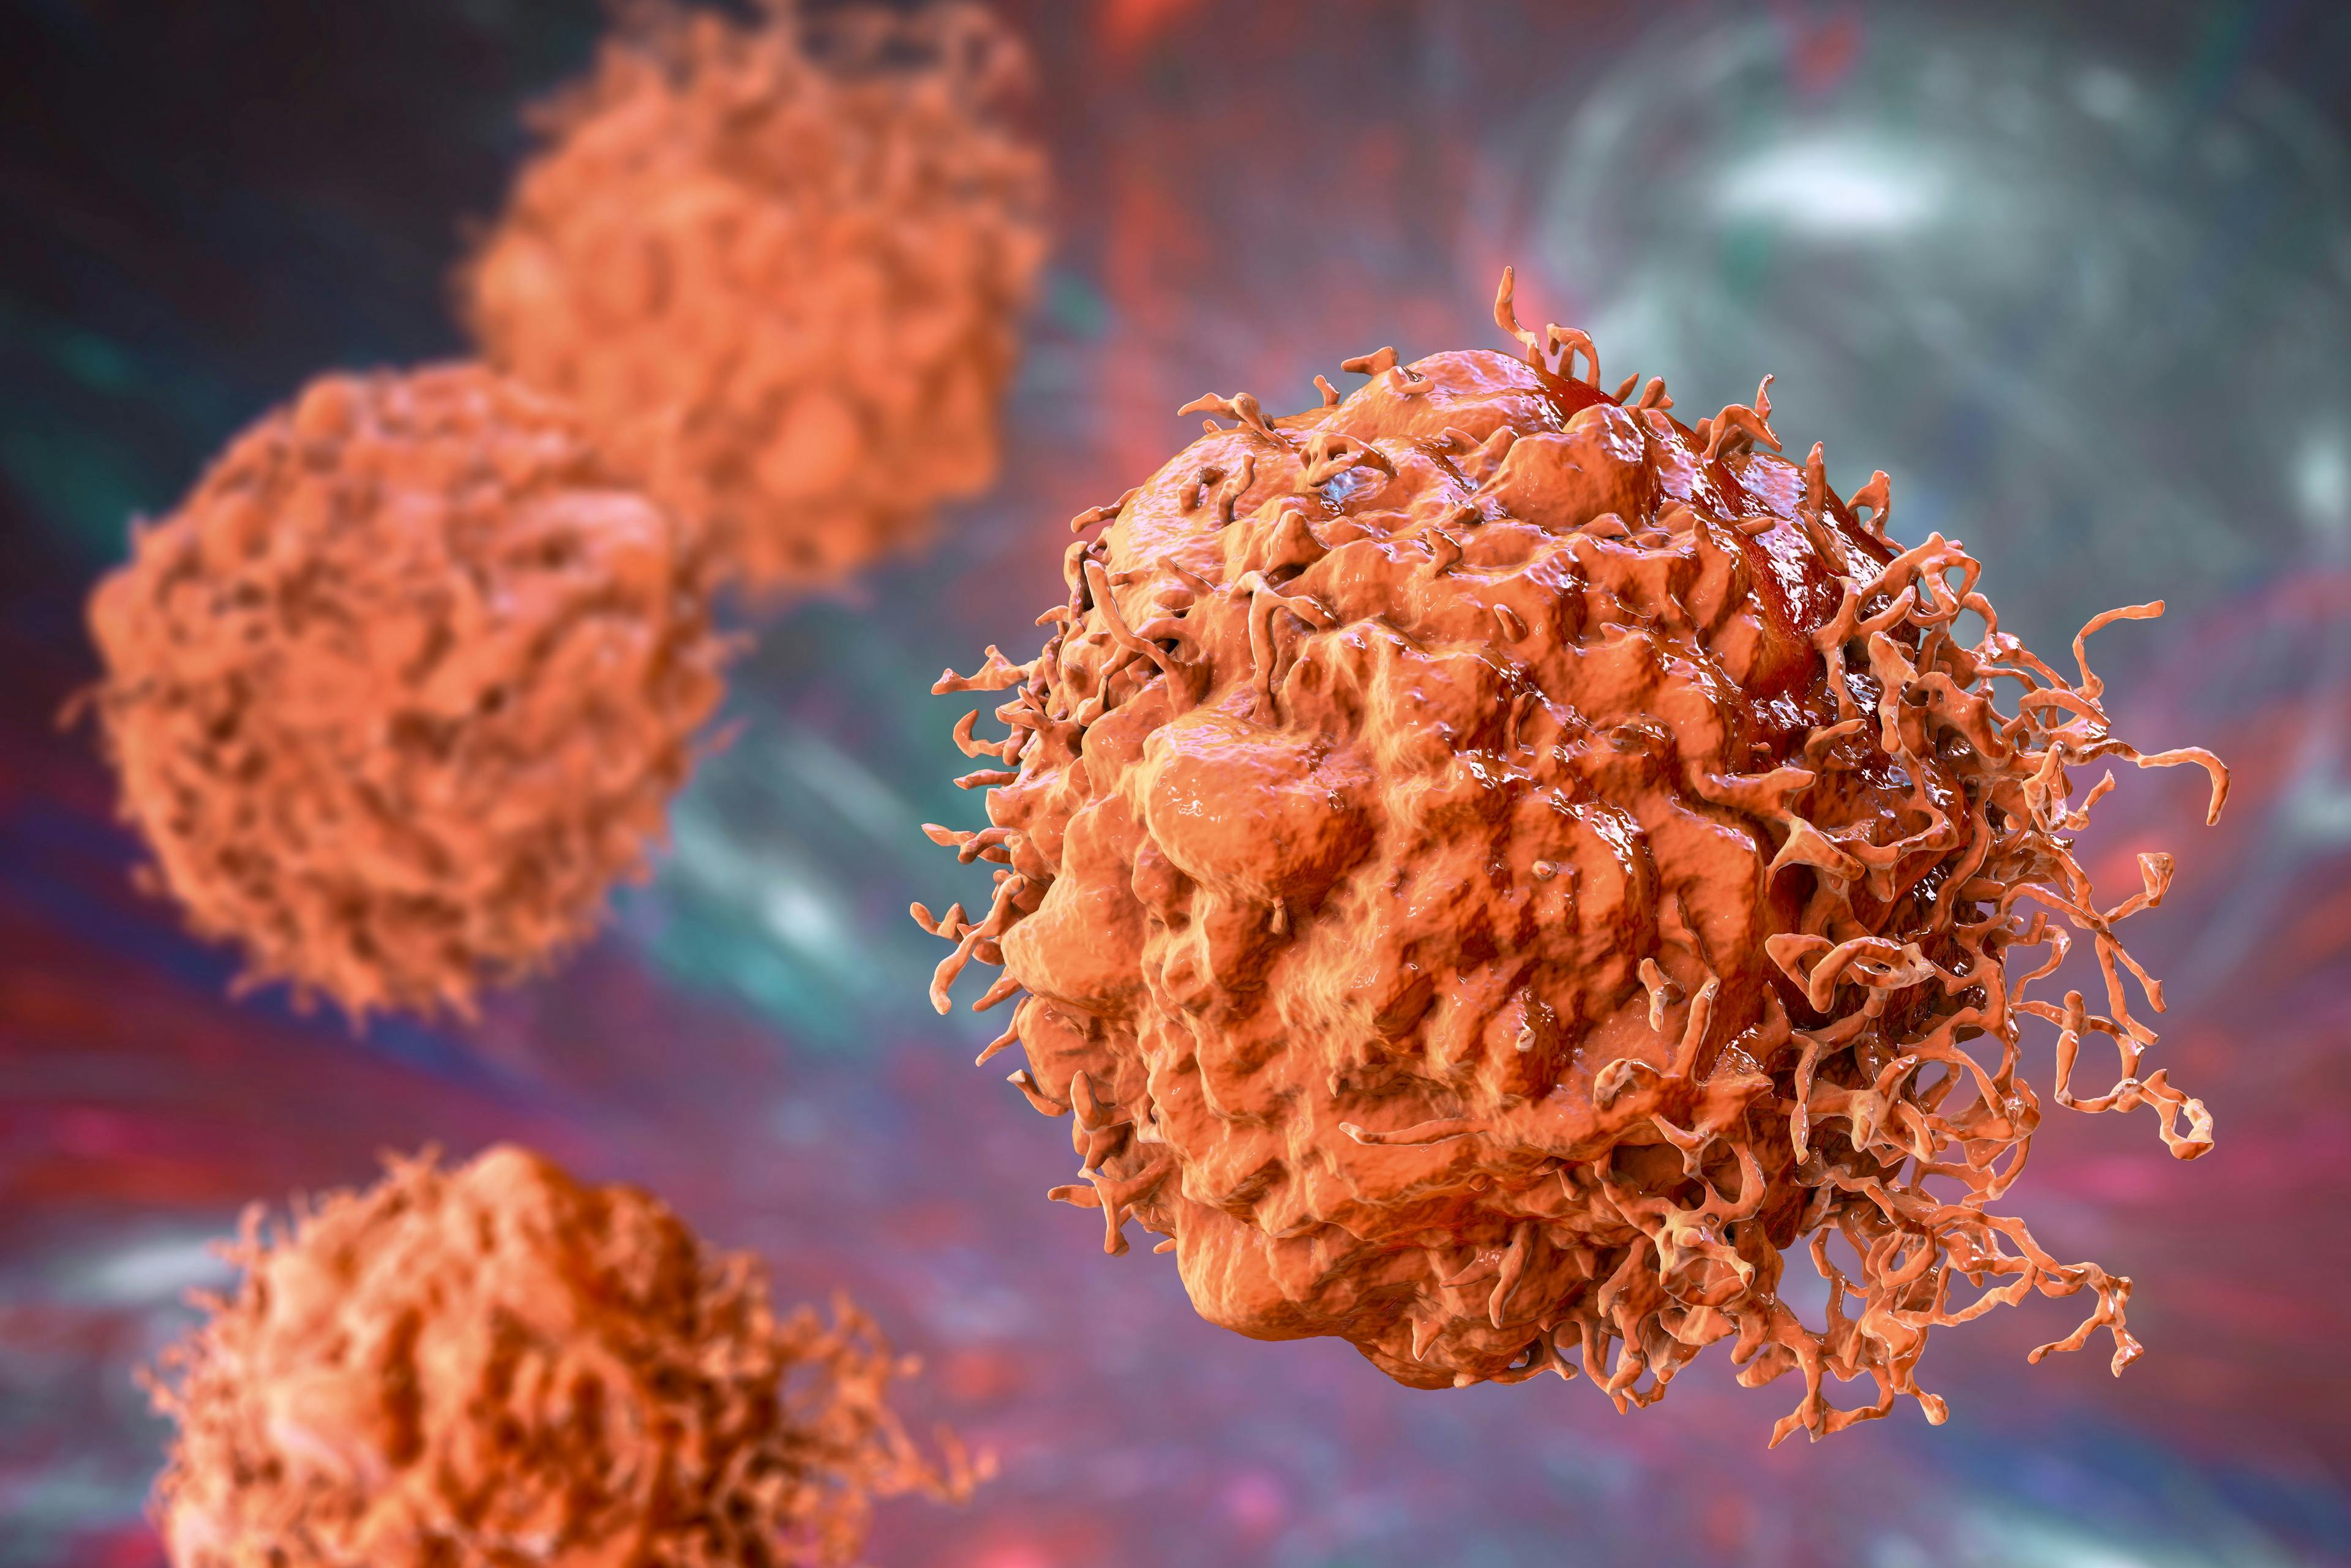 During the trial, patients received pembrolizumab for up to 2 years and then continued treatment with lenvatinib until disease progression or toxicity. Image Credit: © Dr_Microbe - stock.adobe.com